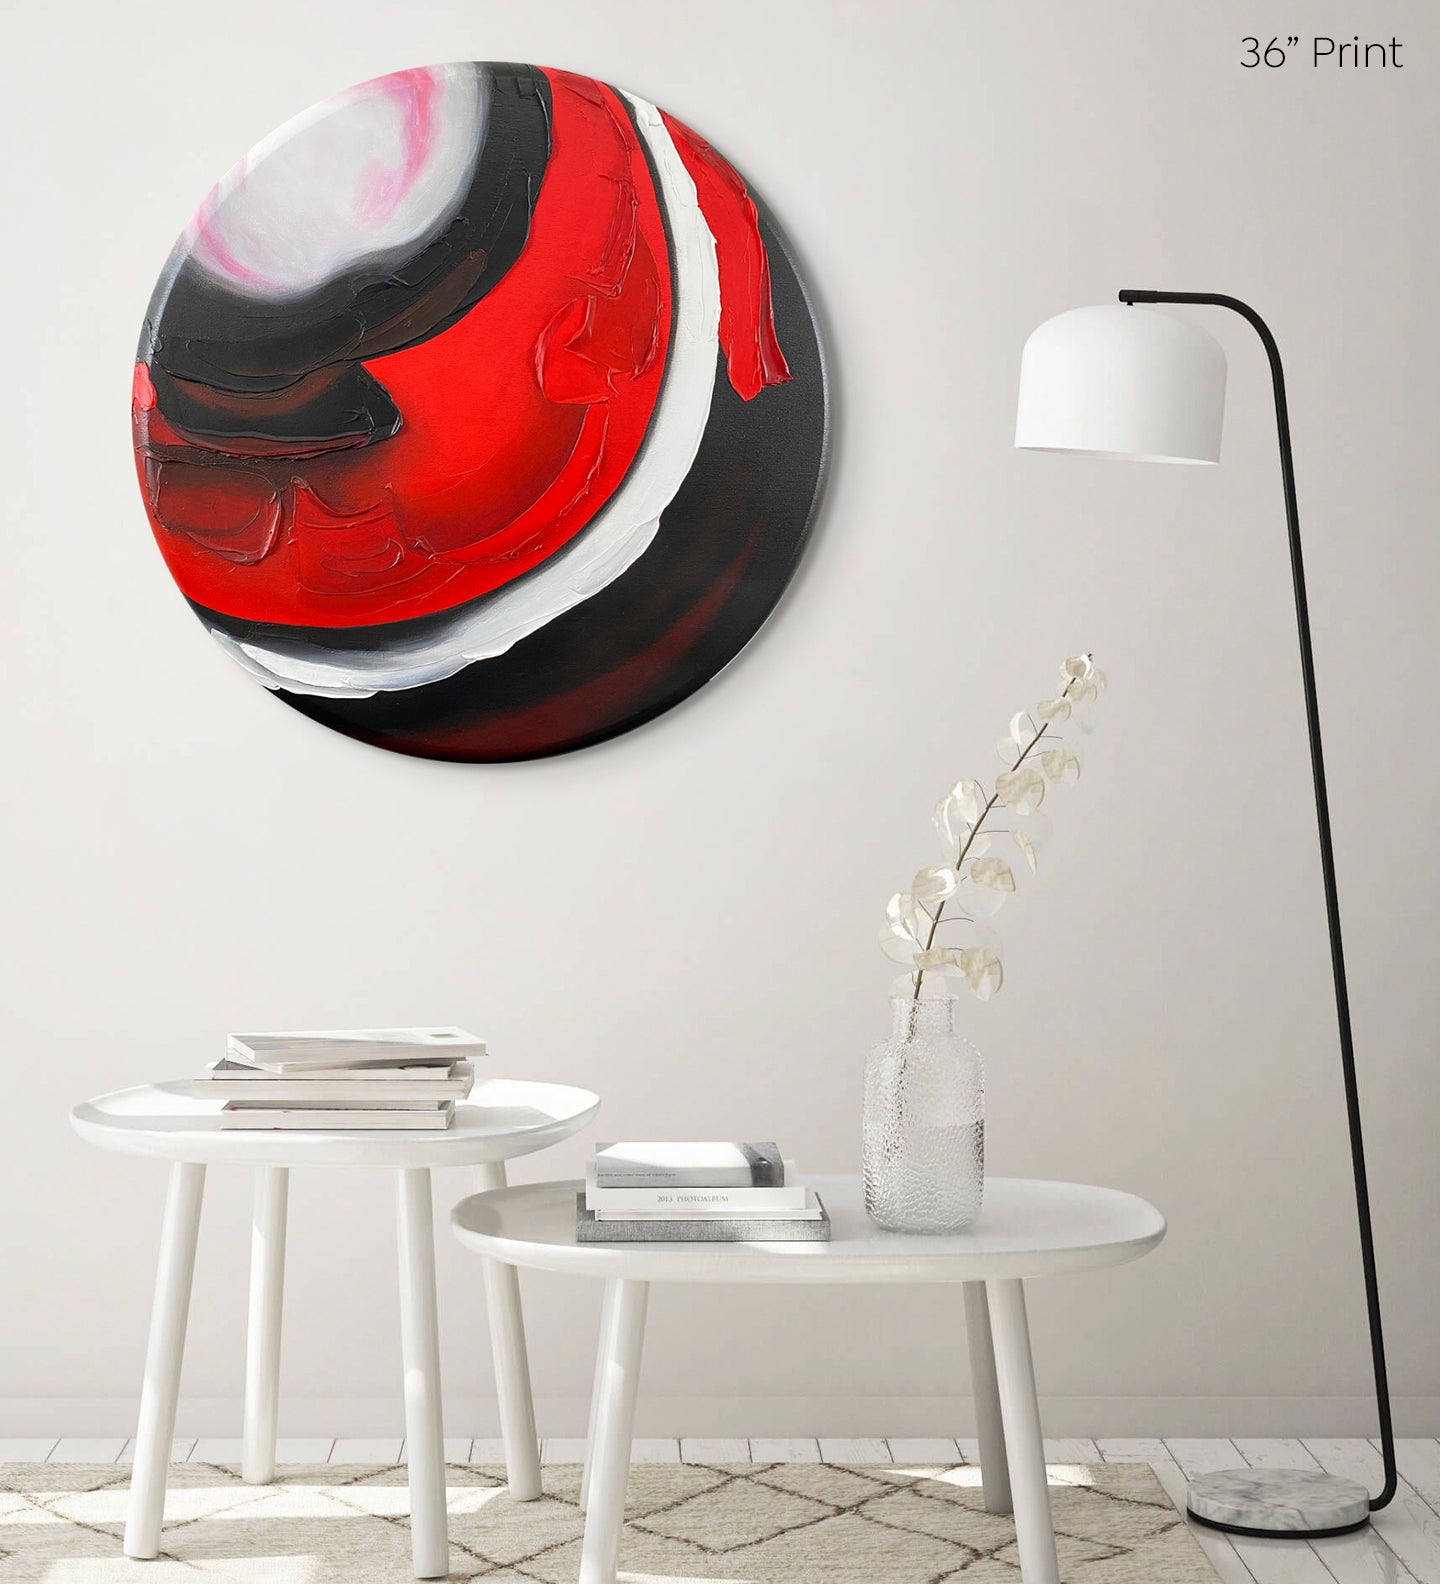 Abstract, acrylic and mixed-media 36” print on a round canvas with curved-edges shown on a pale wall above 2 round tables and a lamp.